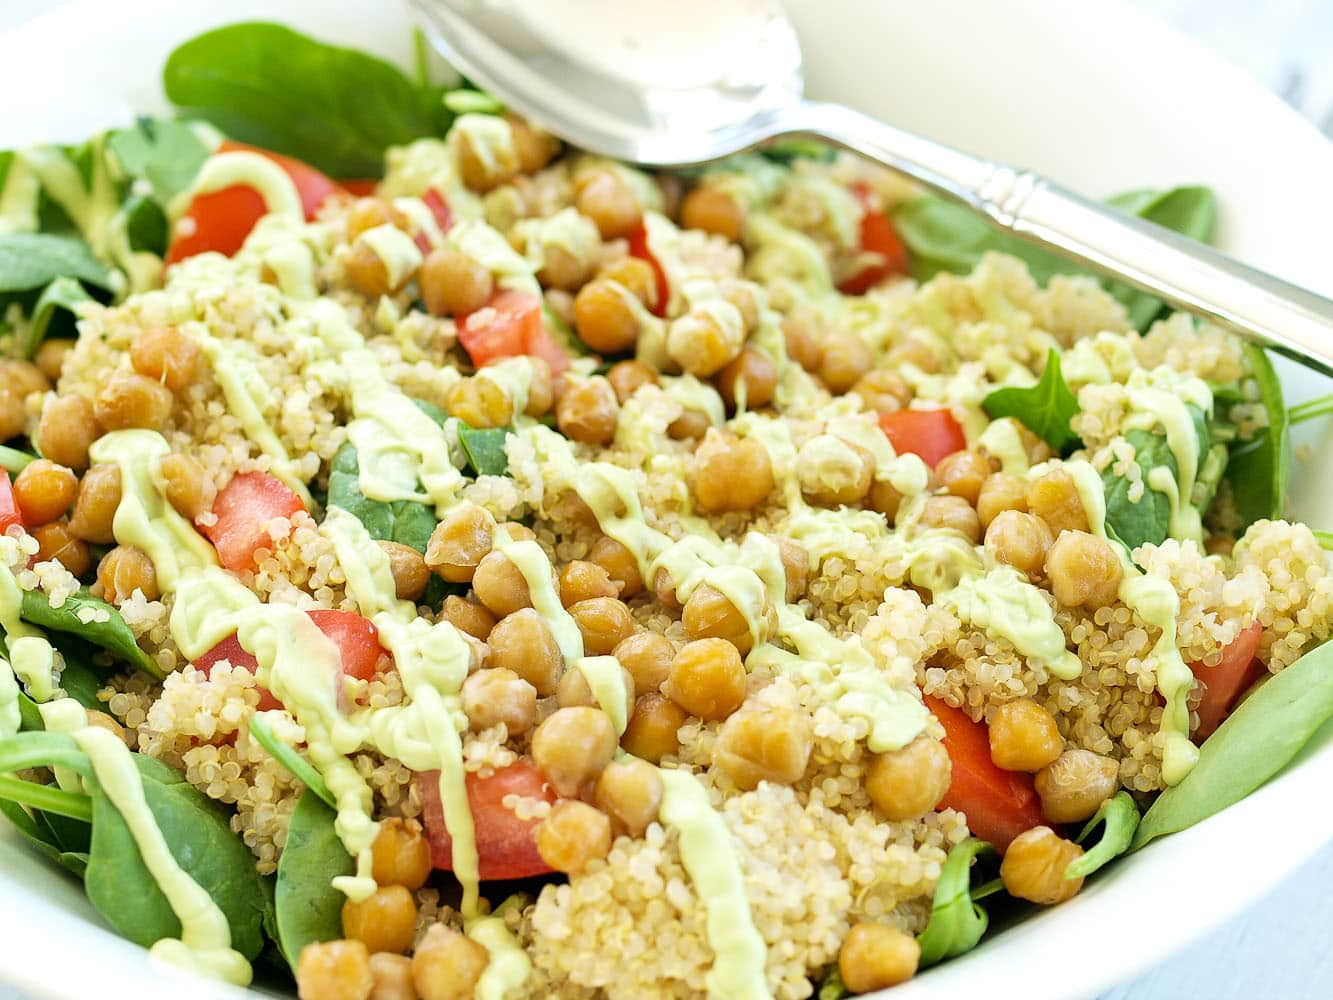 Spinach Salad with Quinoa, Crispy Chickpeas, Tomato, and Avocado Basil Dressing. A hearty, filling salad that can be a meal in itself! Easy healthy vegan recipe.